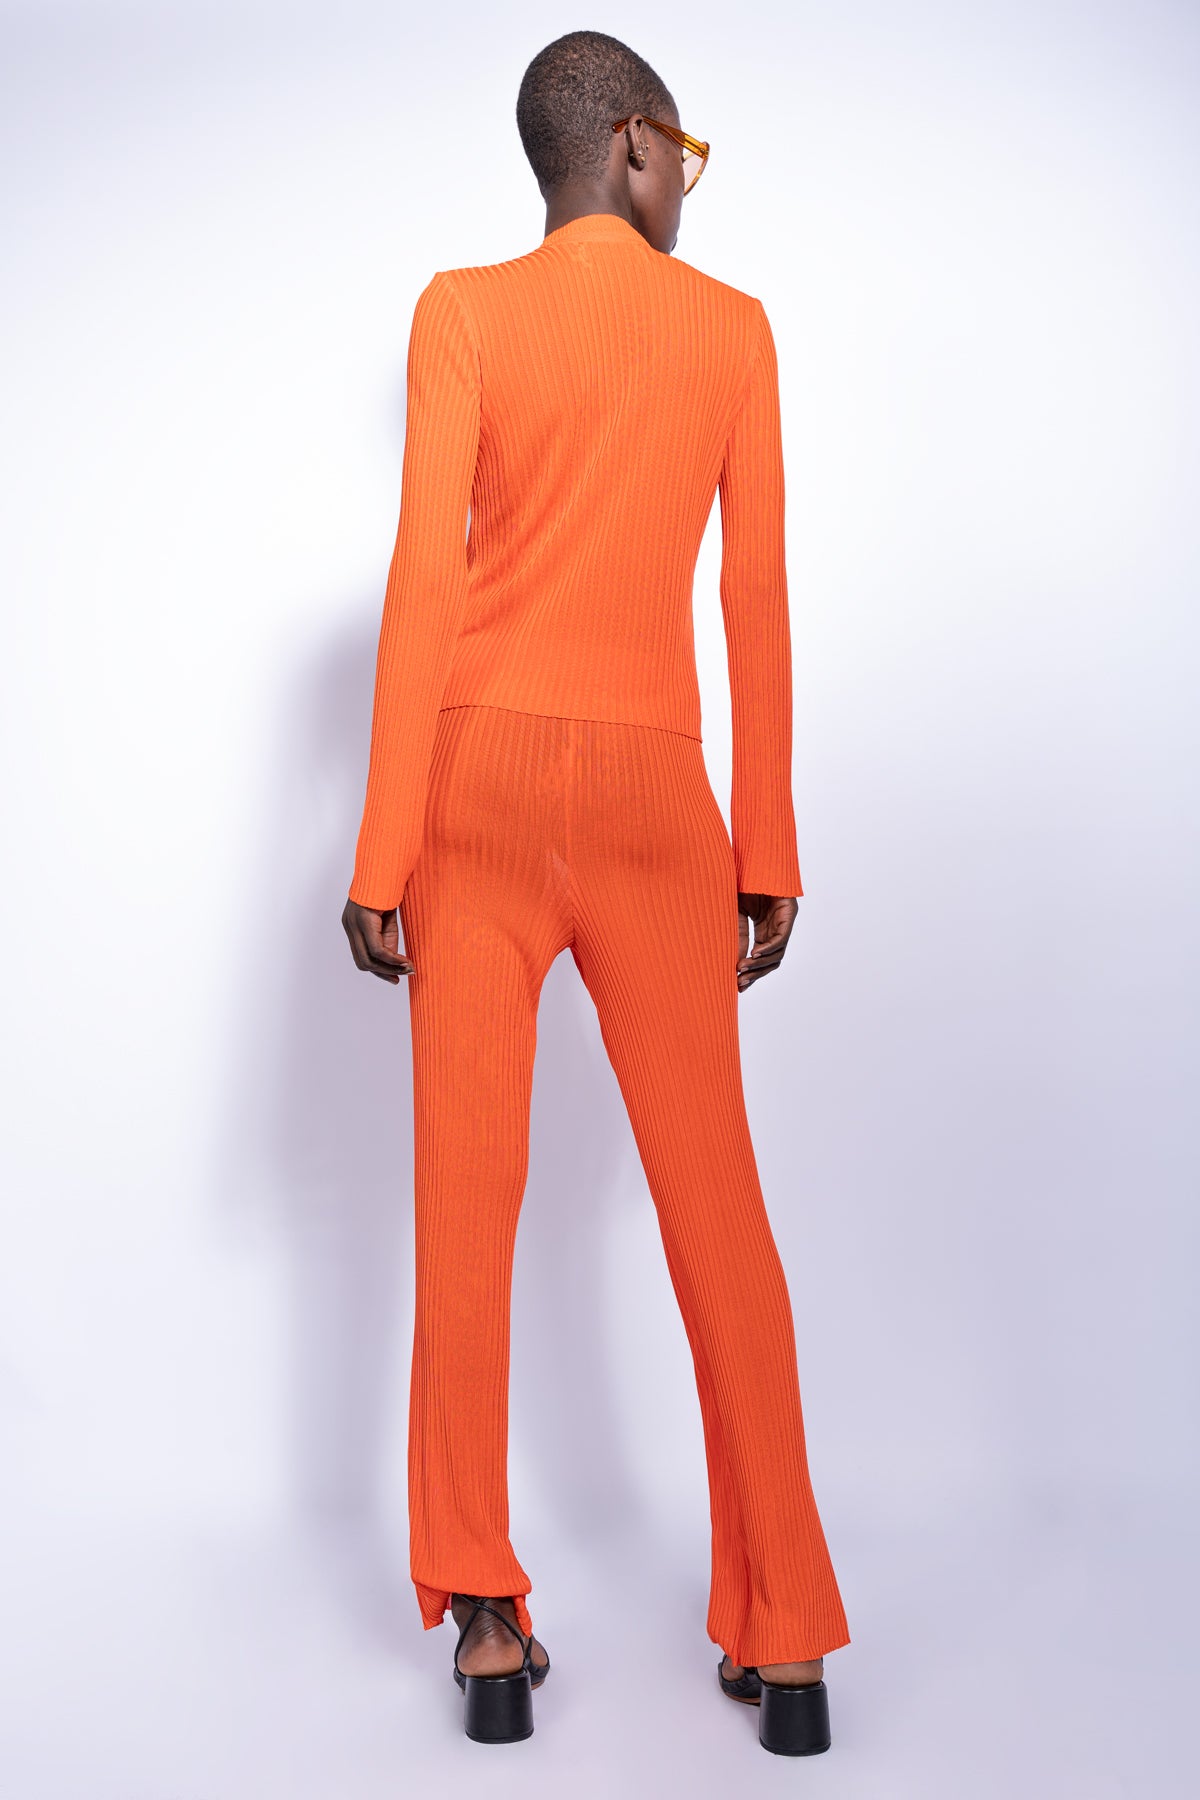 ORANGE FITTED JUMPER IN LIGHT WEIGHT KNIT MARQUES ALMEIDA